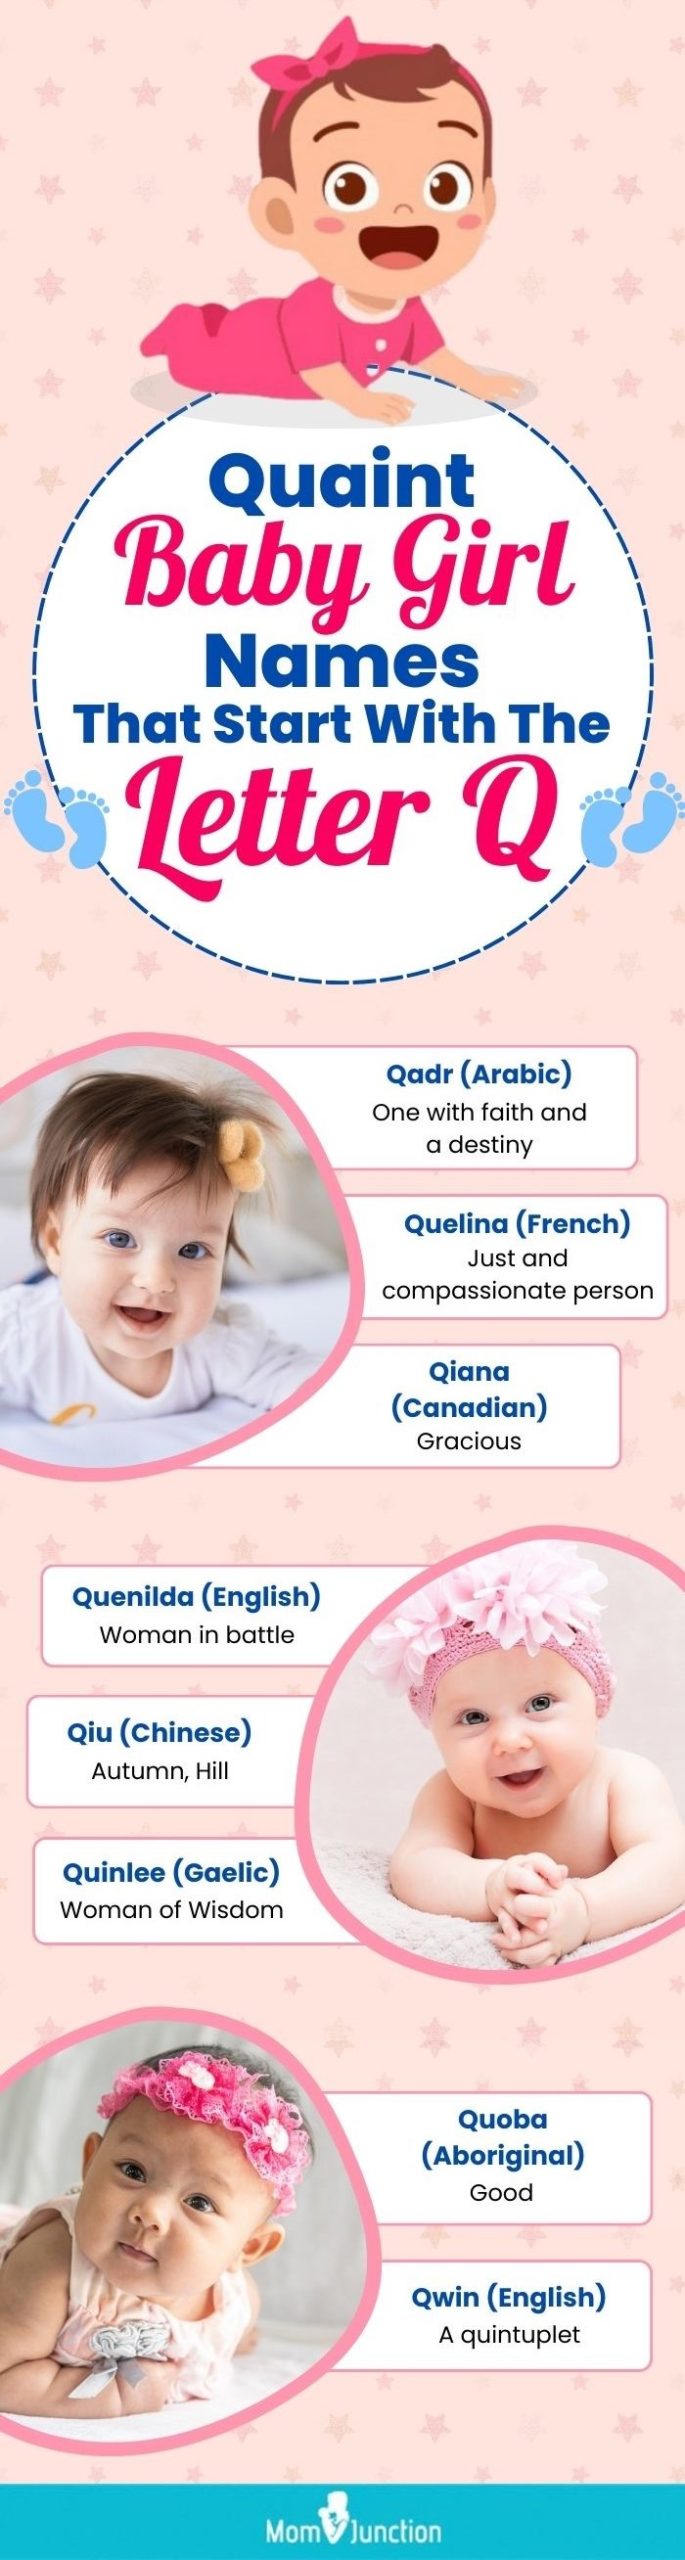 quaint baby girl names that start with the letter q (infographic)